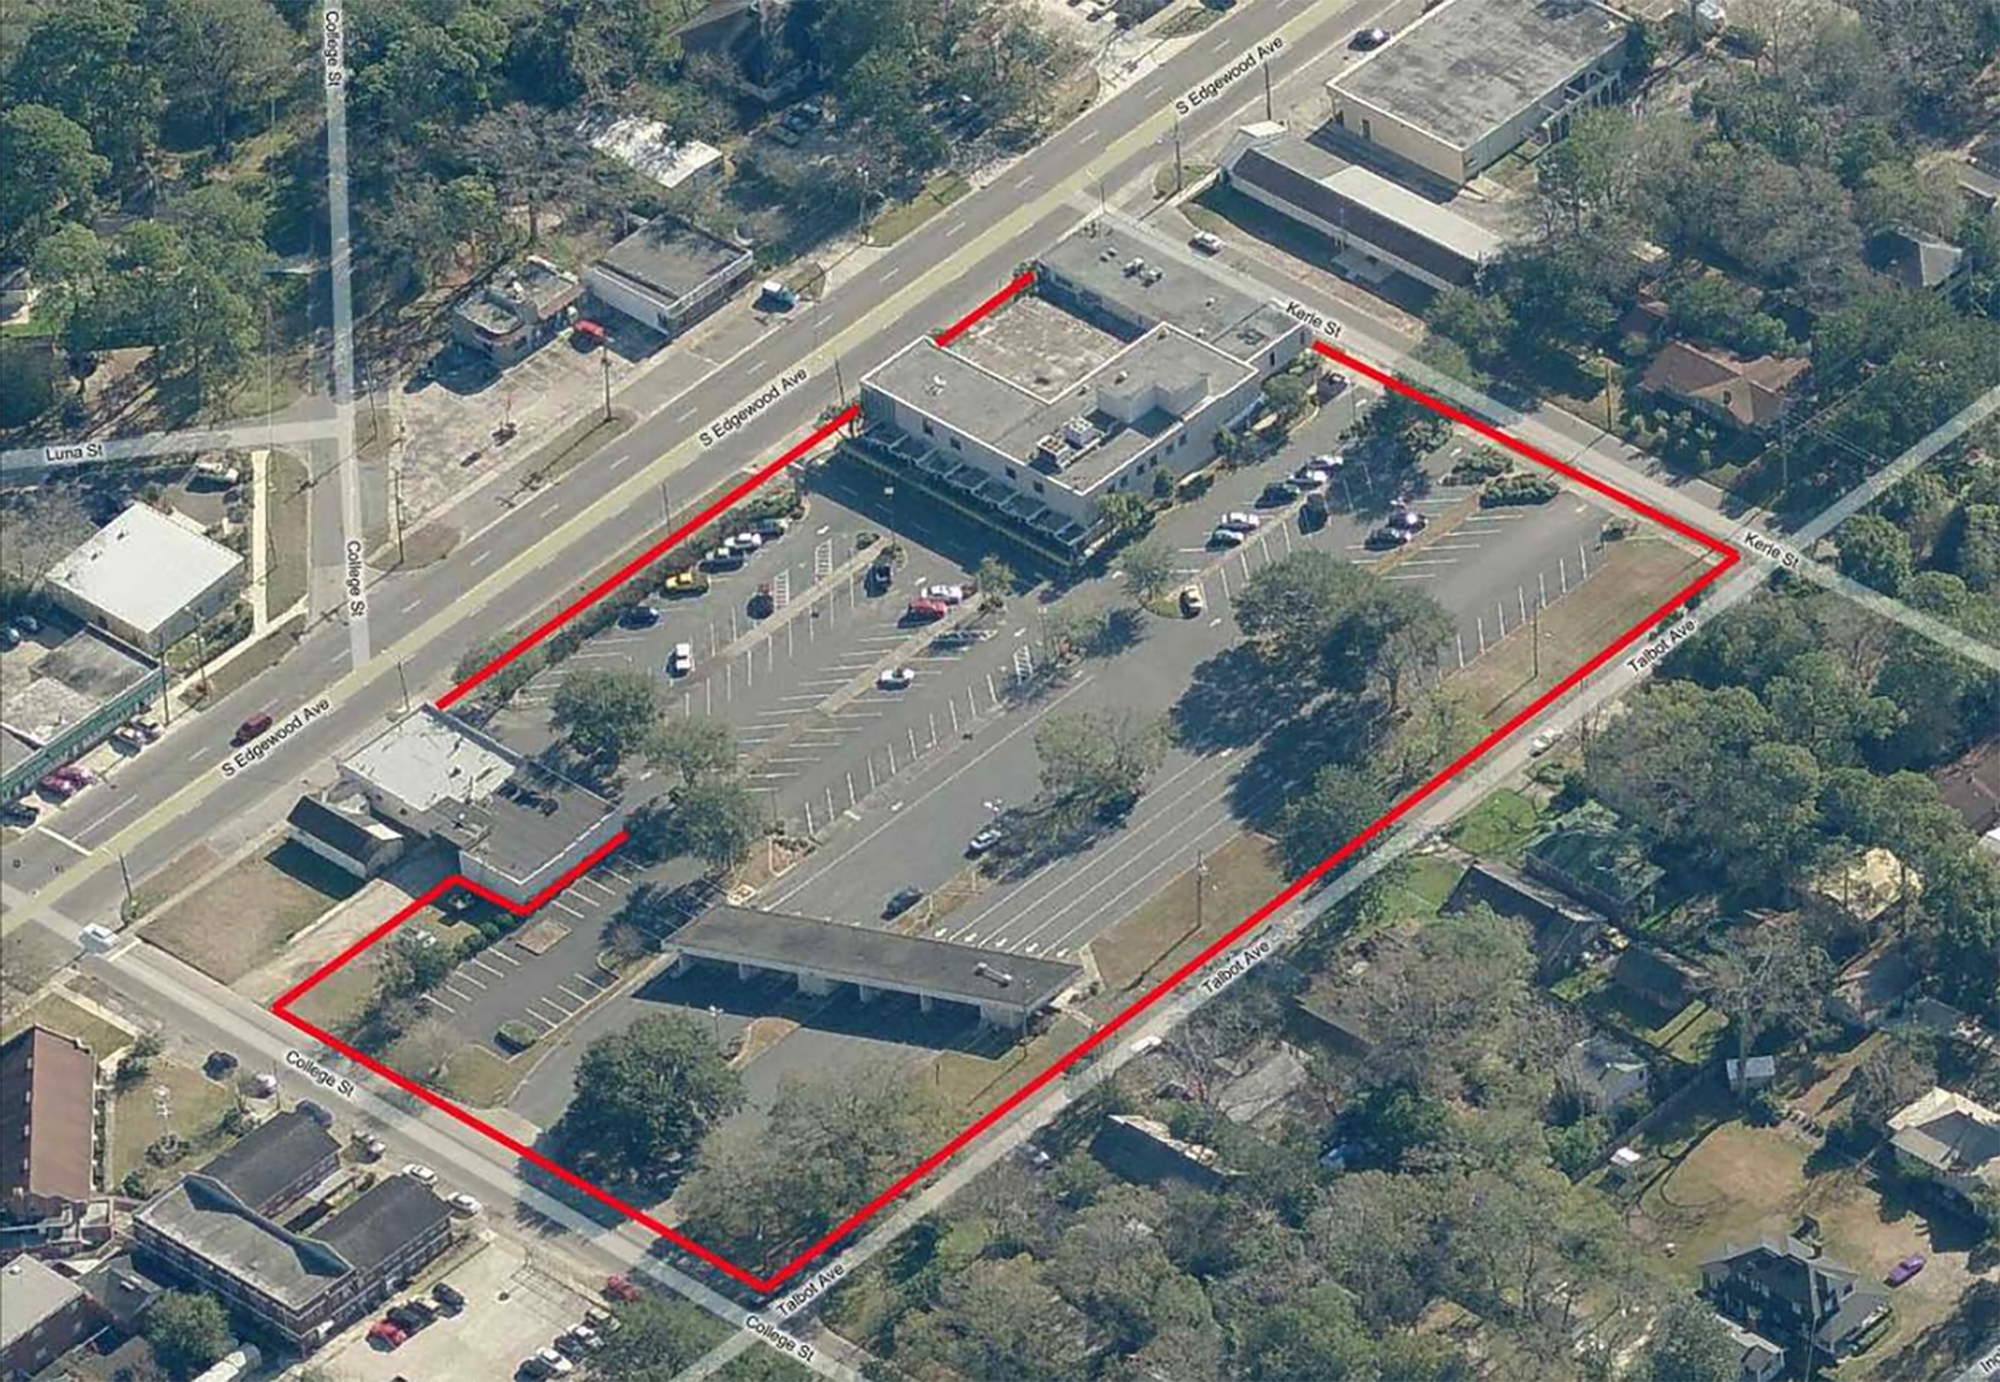 Vestcor Inc. paid $2.1 million for 3.69 acres at northwest Edgewood Avenue and Kerle Street, where it wants to build 117 apartments.